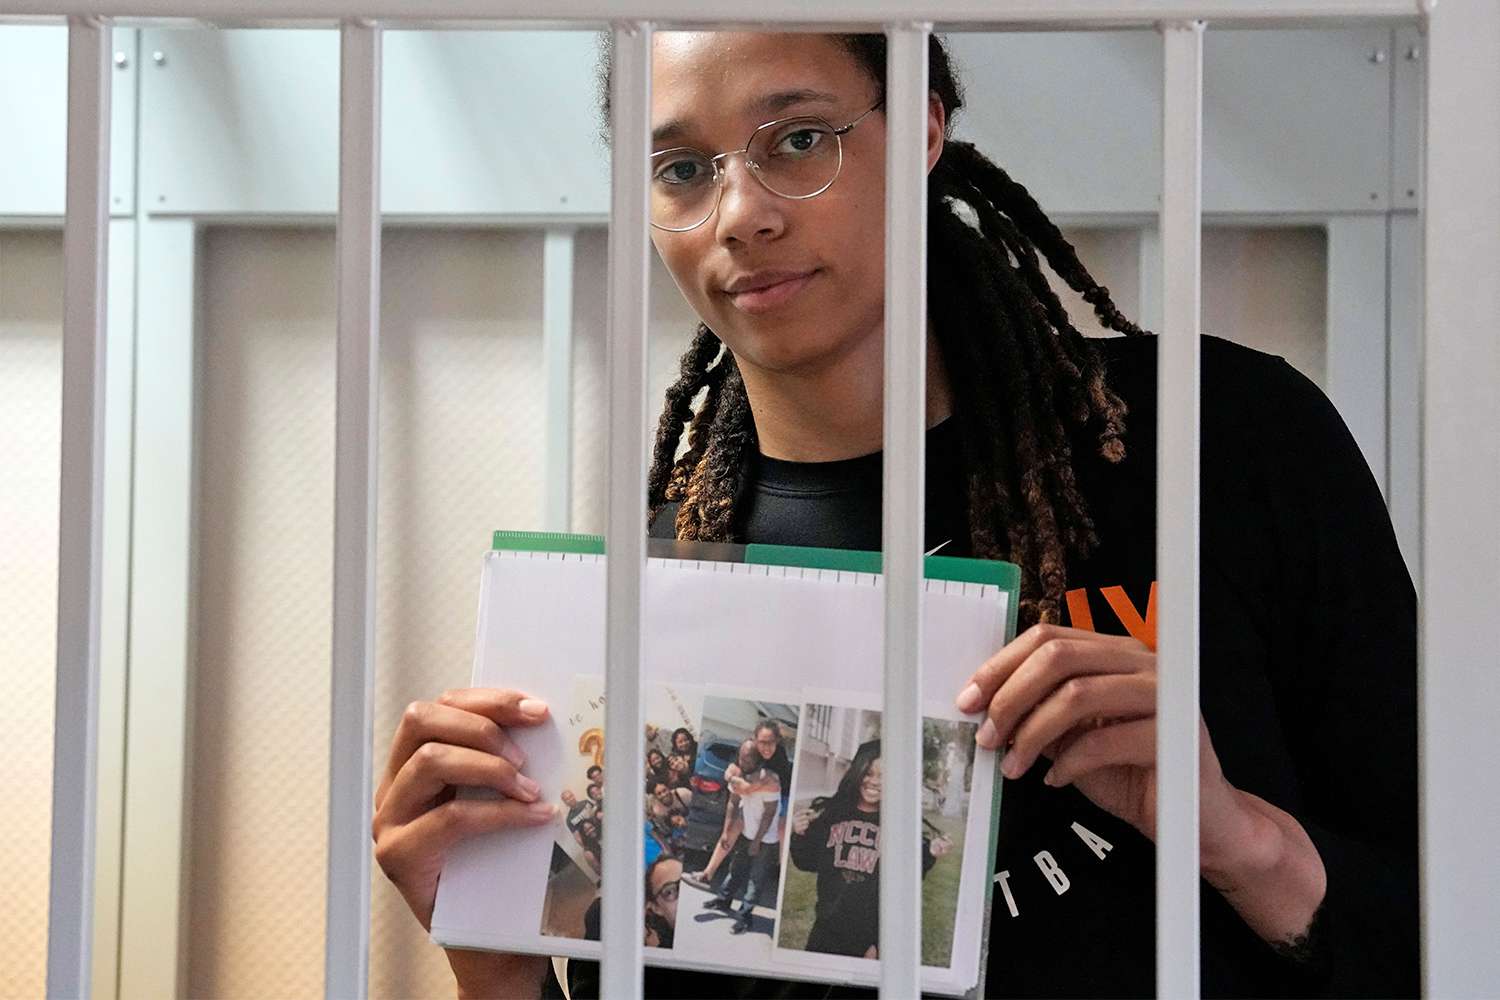 WNBA star and two-time Olympic gold medalist Brittney Griner holds images standing in a cage in a courtroom prior to a hearing at the Khimki City Court outside Moscow, Russia, 27 July 2022. Griner, a World Champion player of the WNBA's Phoenix Mercury team was arrested in February at Moscow's Sheremetyevo Airport after some hash oil was detected and found in her luggage, for which she now could face a prison sentence of up to ten years. US basketball player Brittney Griner attends hearing on drug charges, Moscow, Russian Federation - 27 Jul 2022